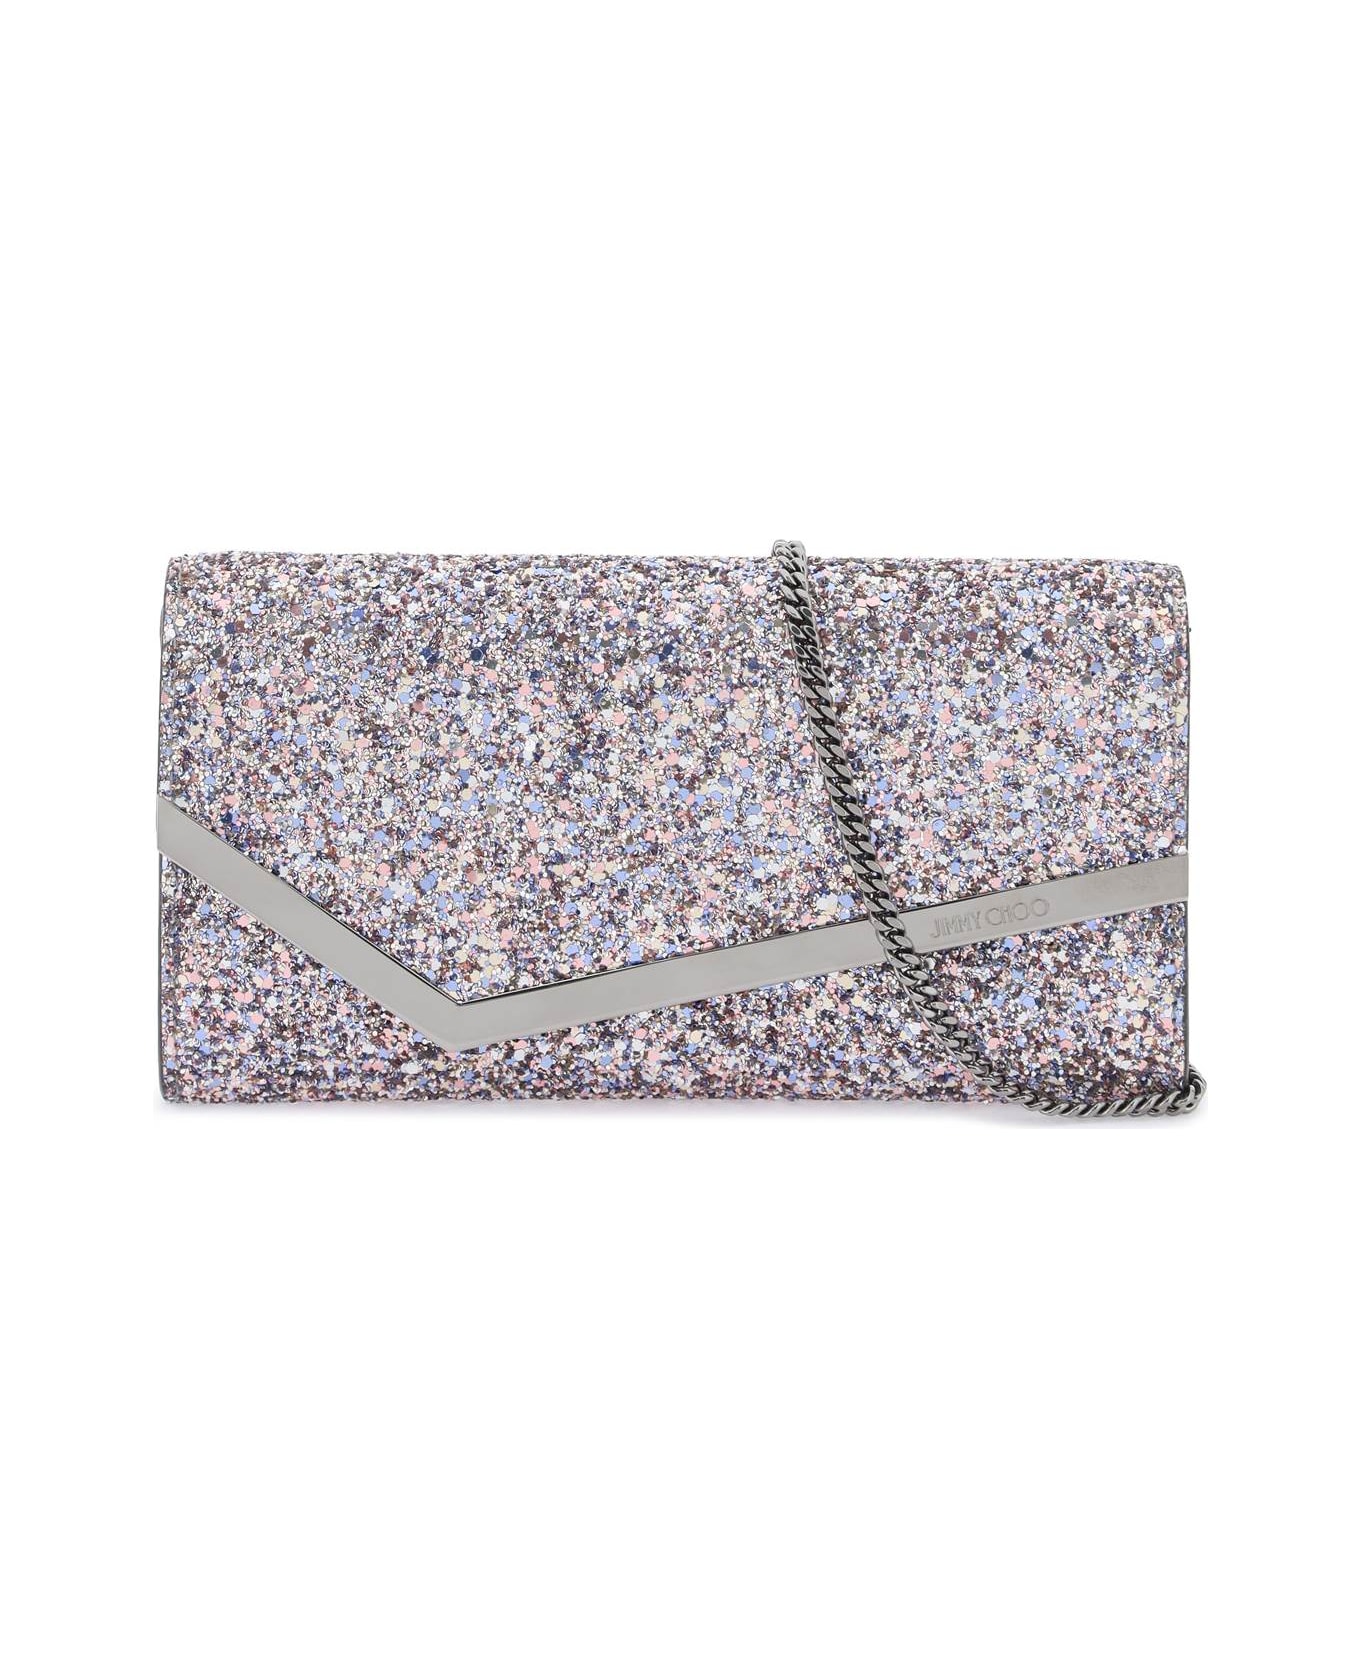 Jimmy Choo Glittered Emmie Clutch - SPRINKLE MIX クラッチバッグ